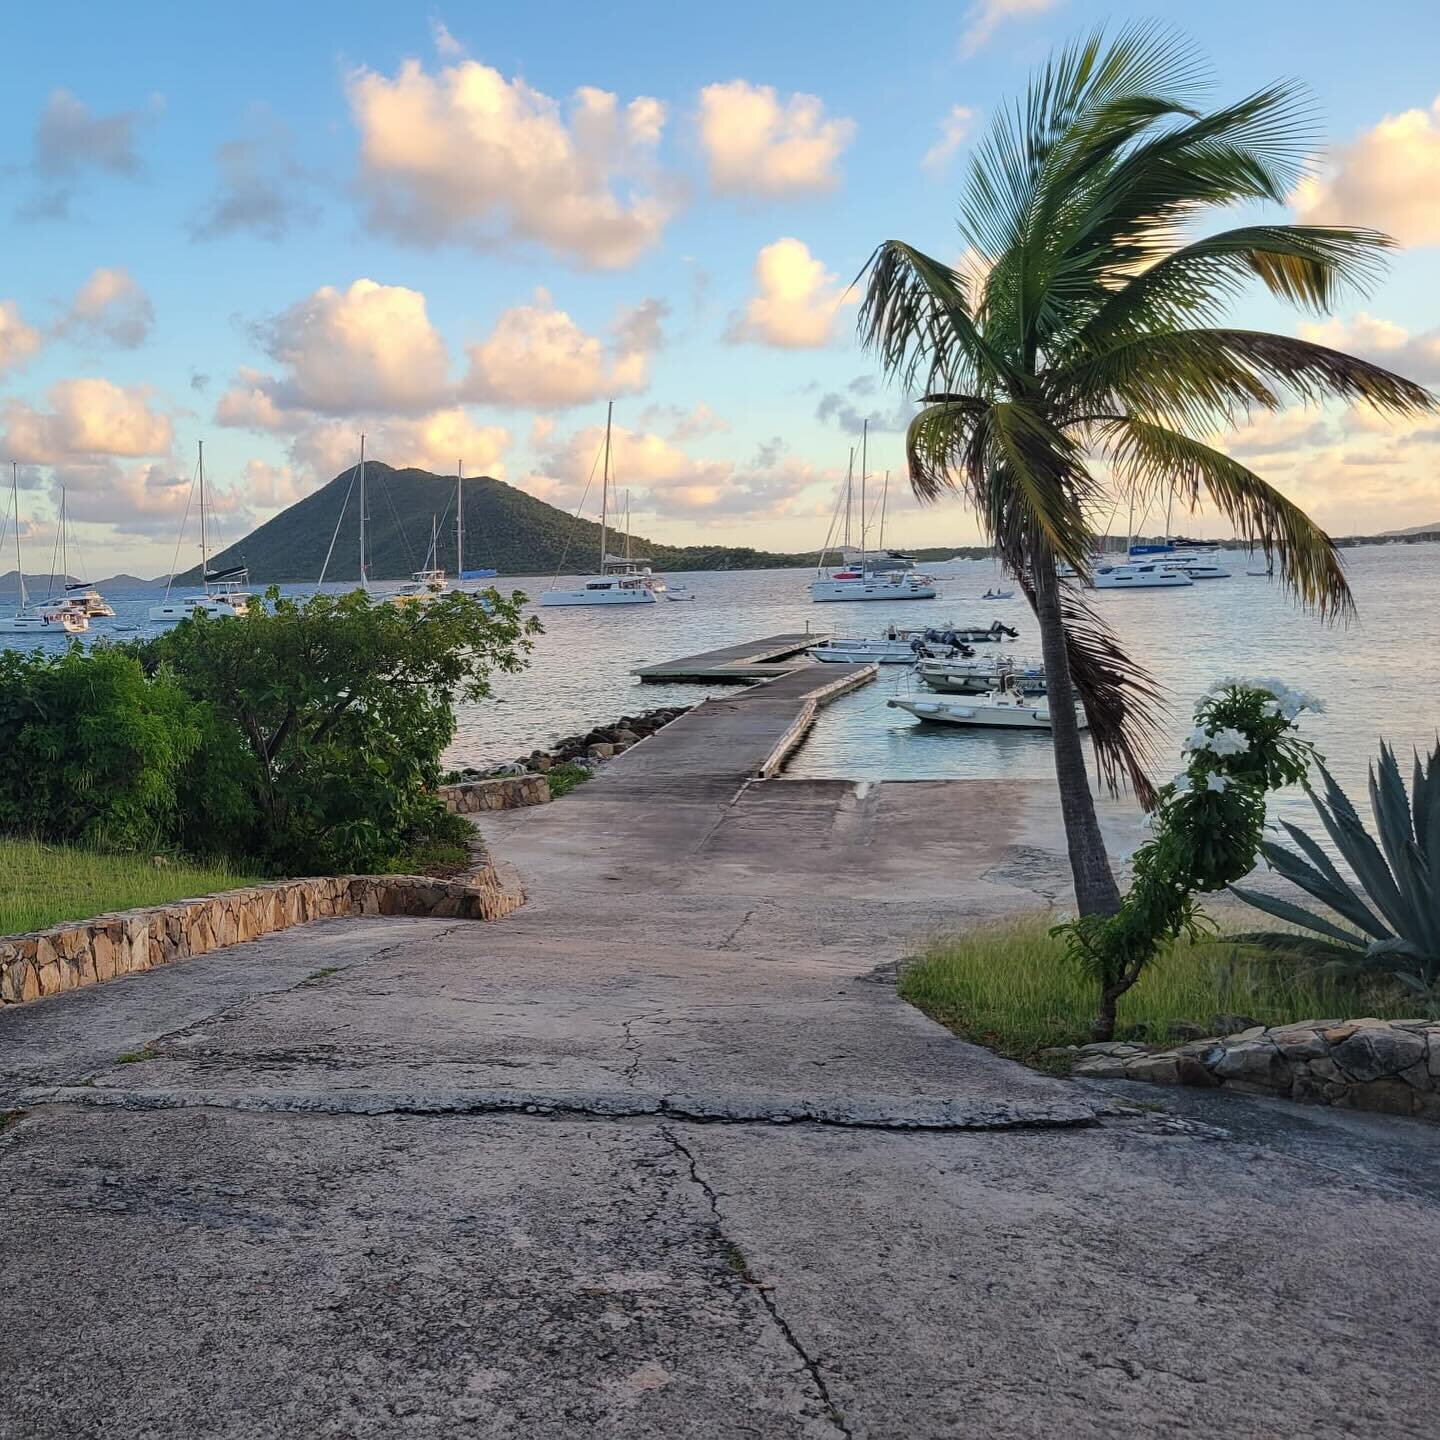 Follow the path leading down to where the ocean meets our shore, offering you private access to both a boat and a secluded beach. Just offshore, Diamond Reef awaits, famed for its snorkeling. It&rsquo;s your personal gateway to explore the underwater